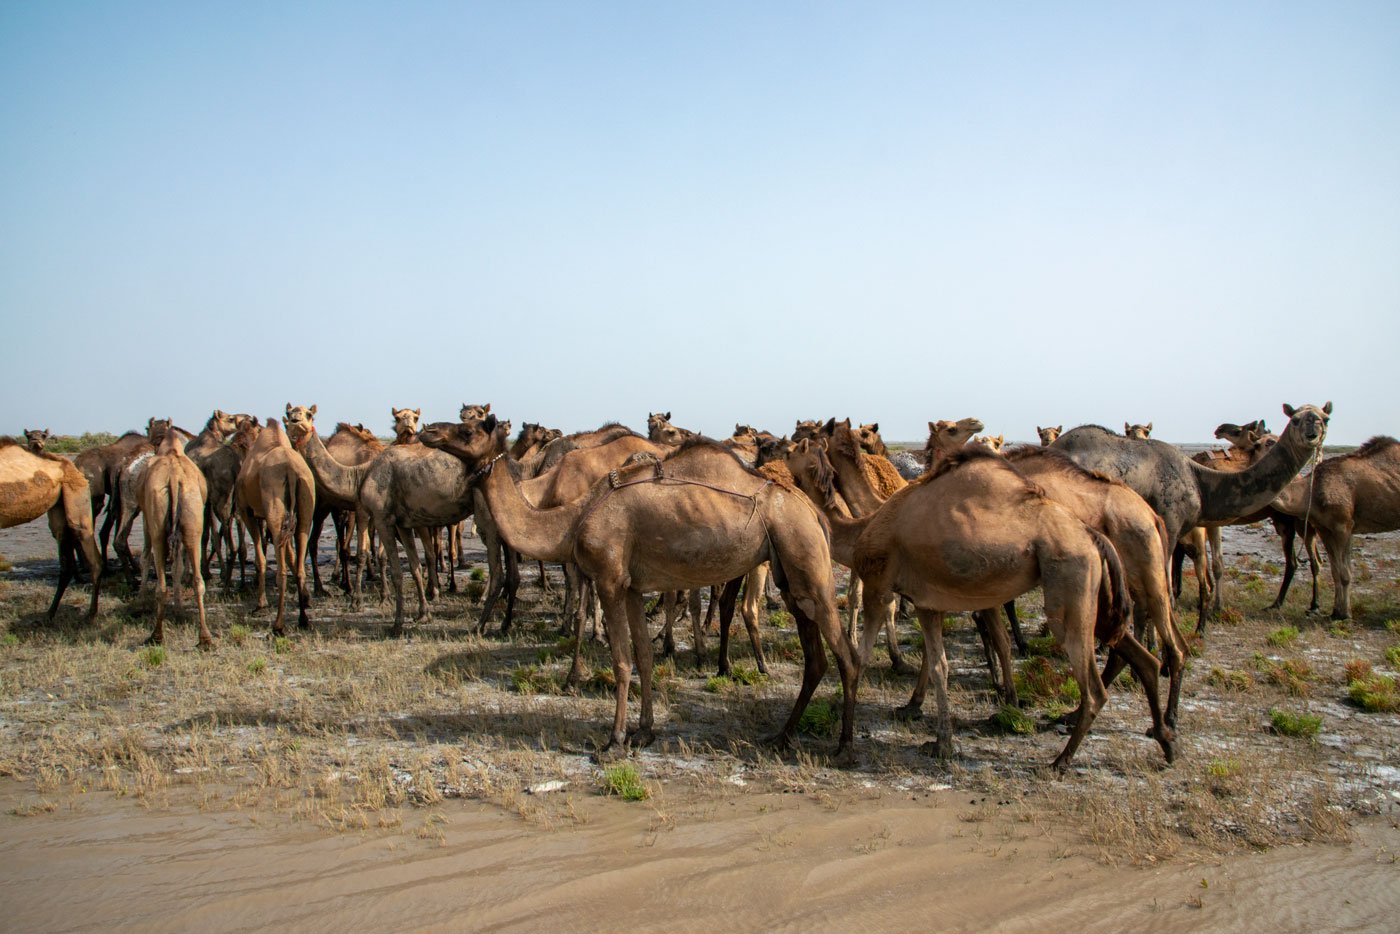 There are about 1,180 camels that graze within the Marine National Park and Sanctuary